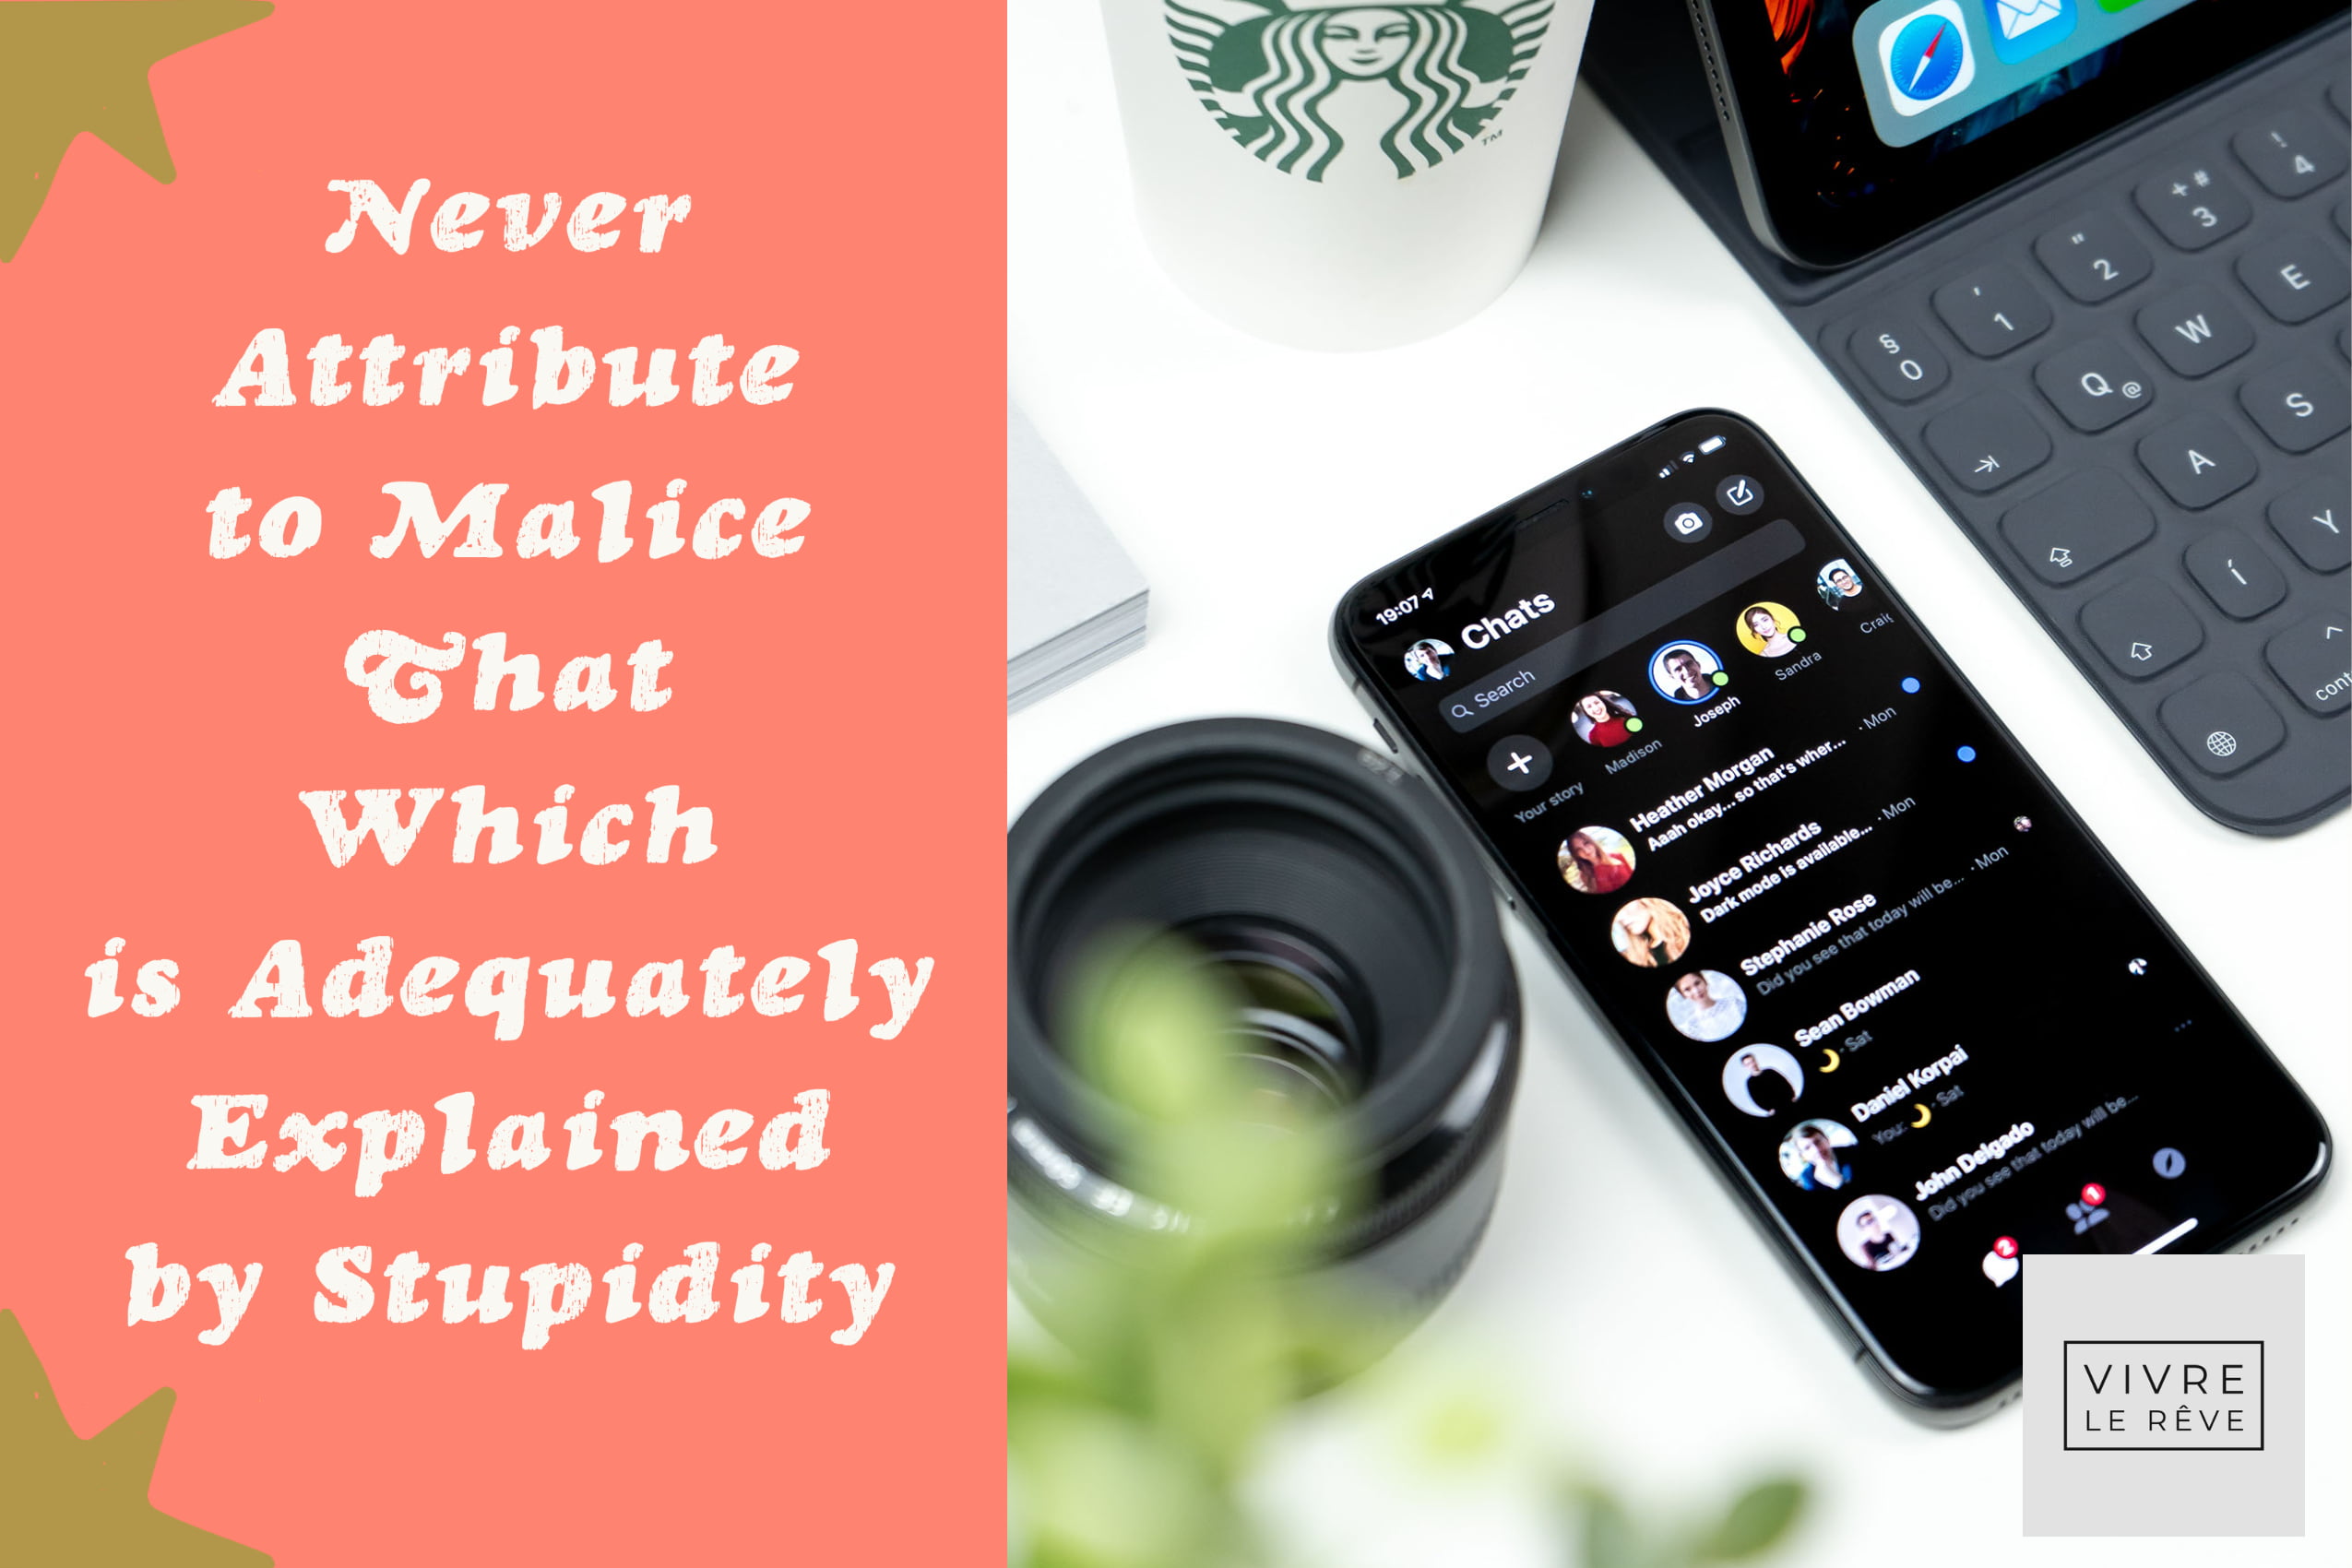 Never Attribute to Malice That Which is Adequately Explained by Stupidity